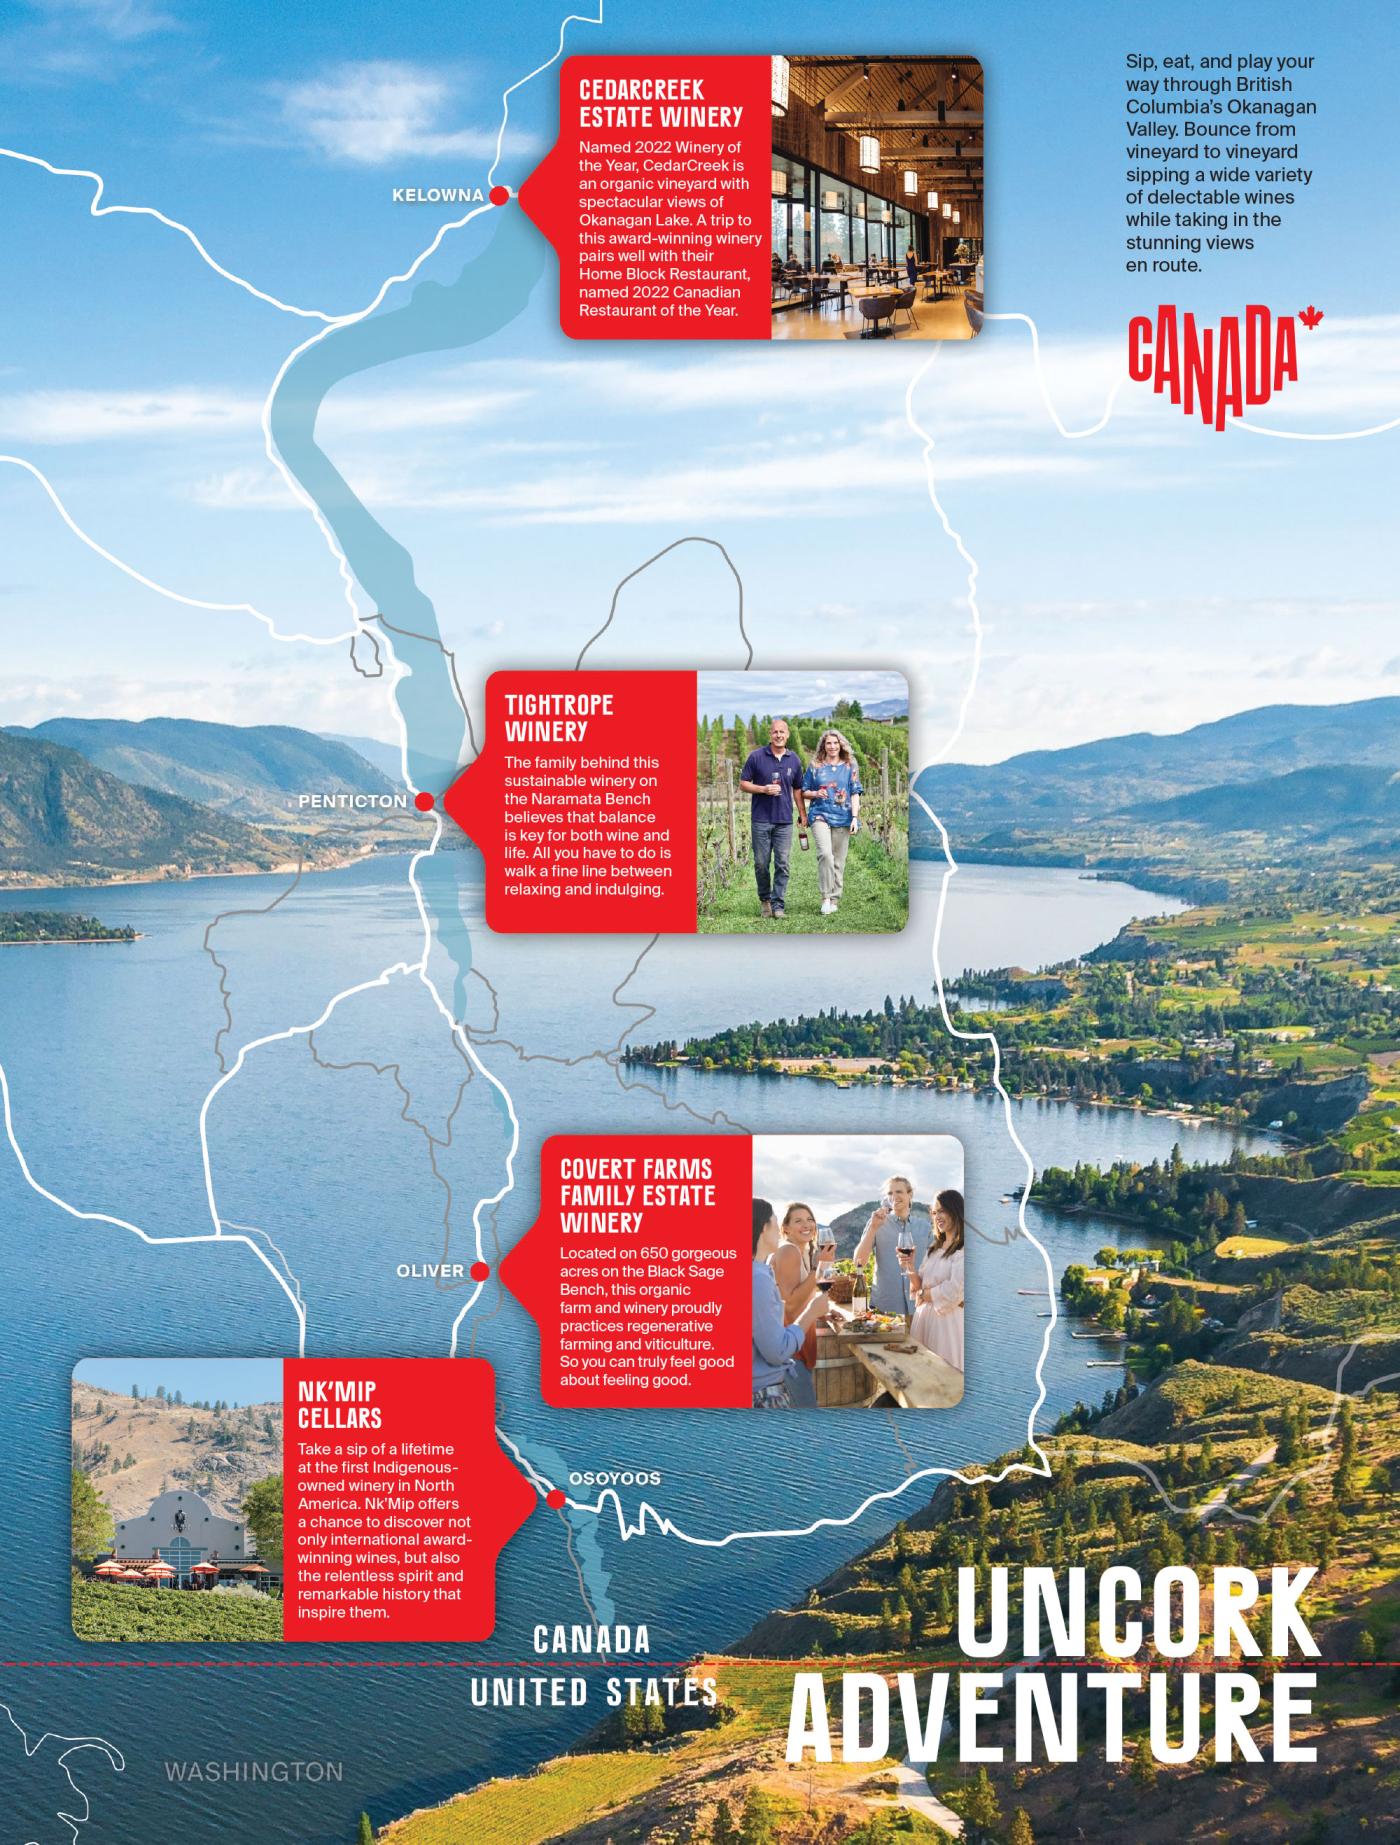 An example of a one page 'Journeys' ad